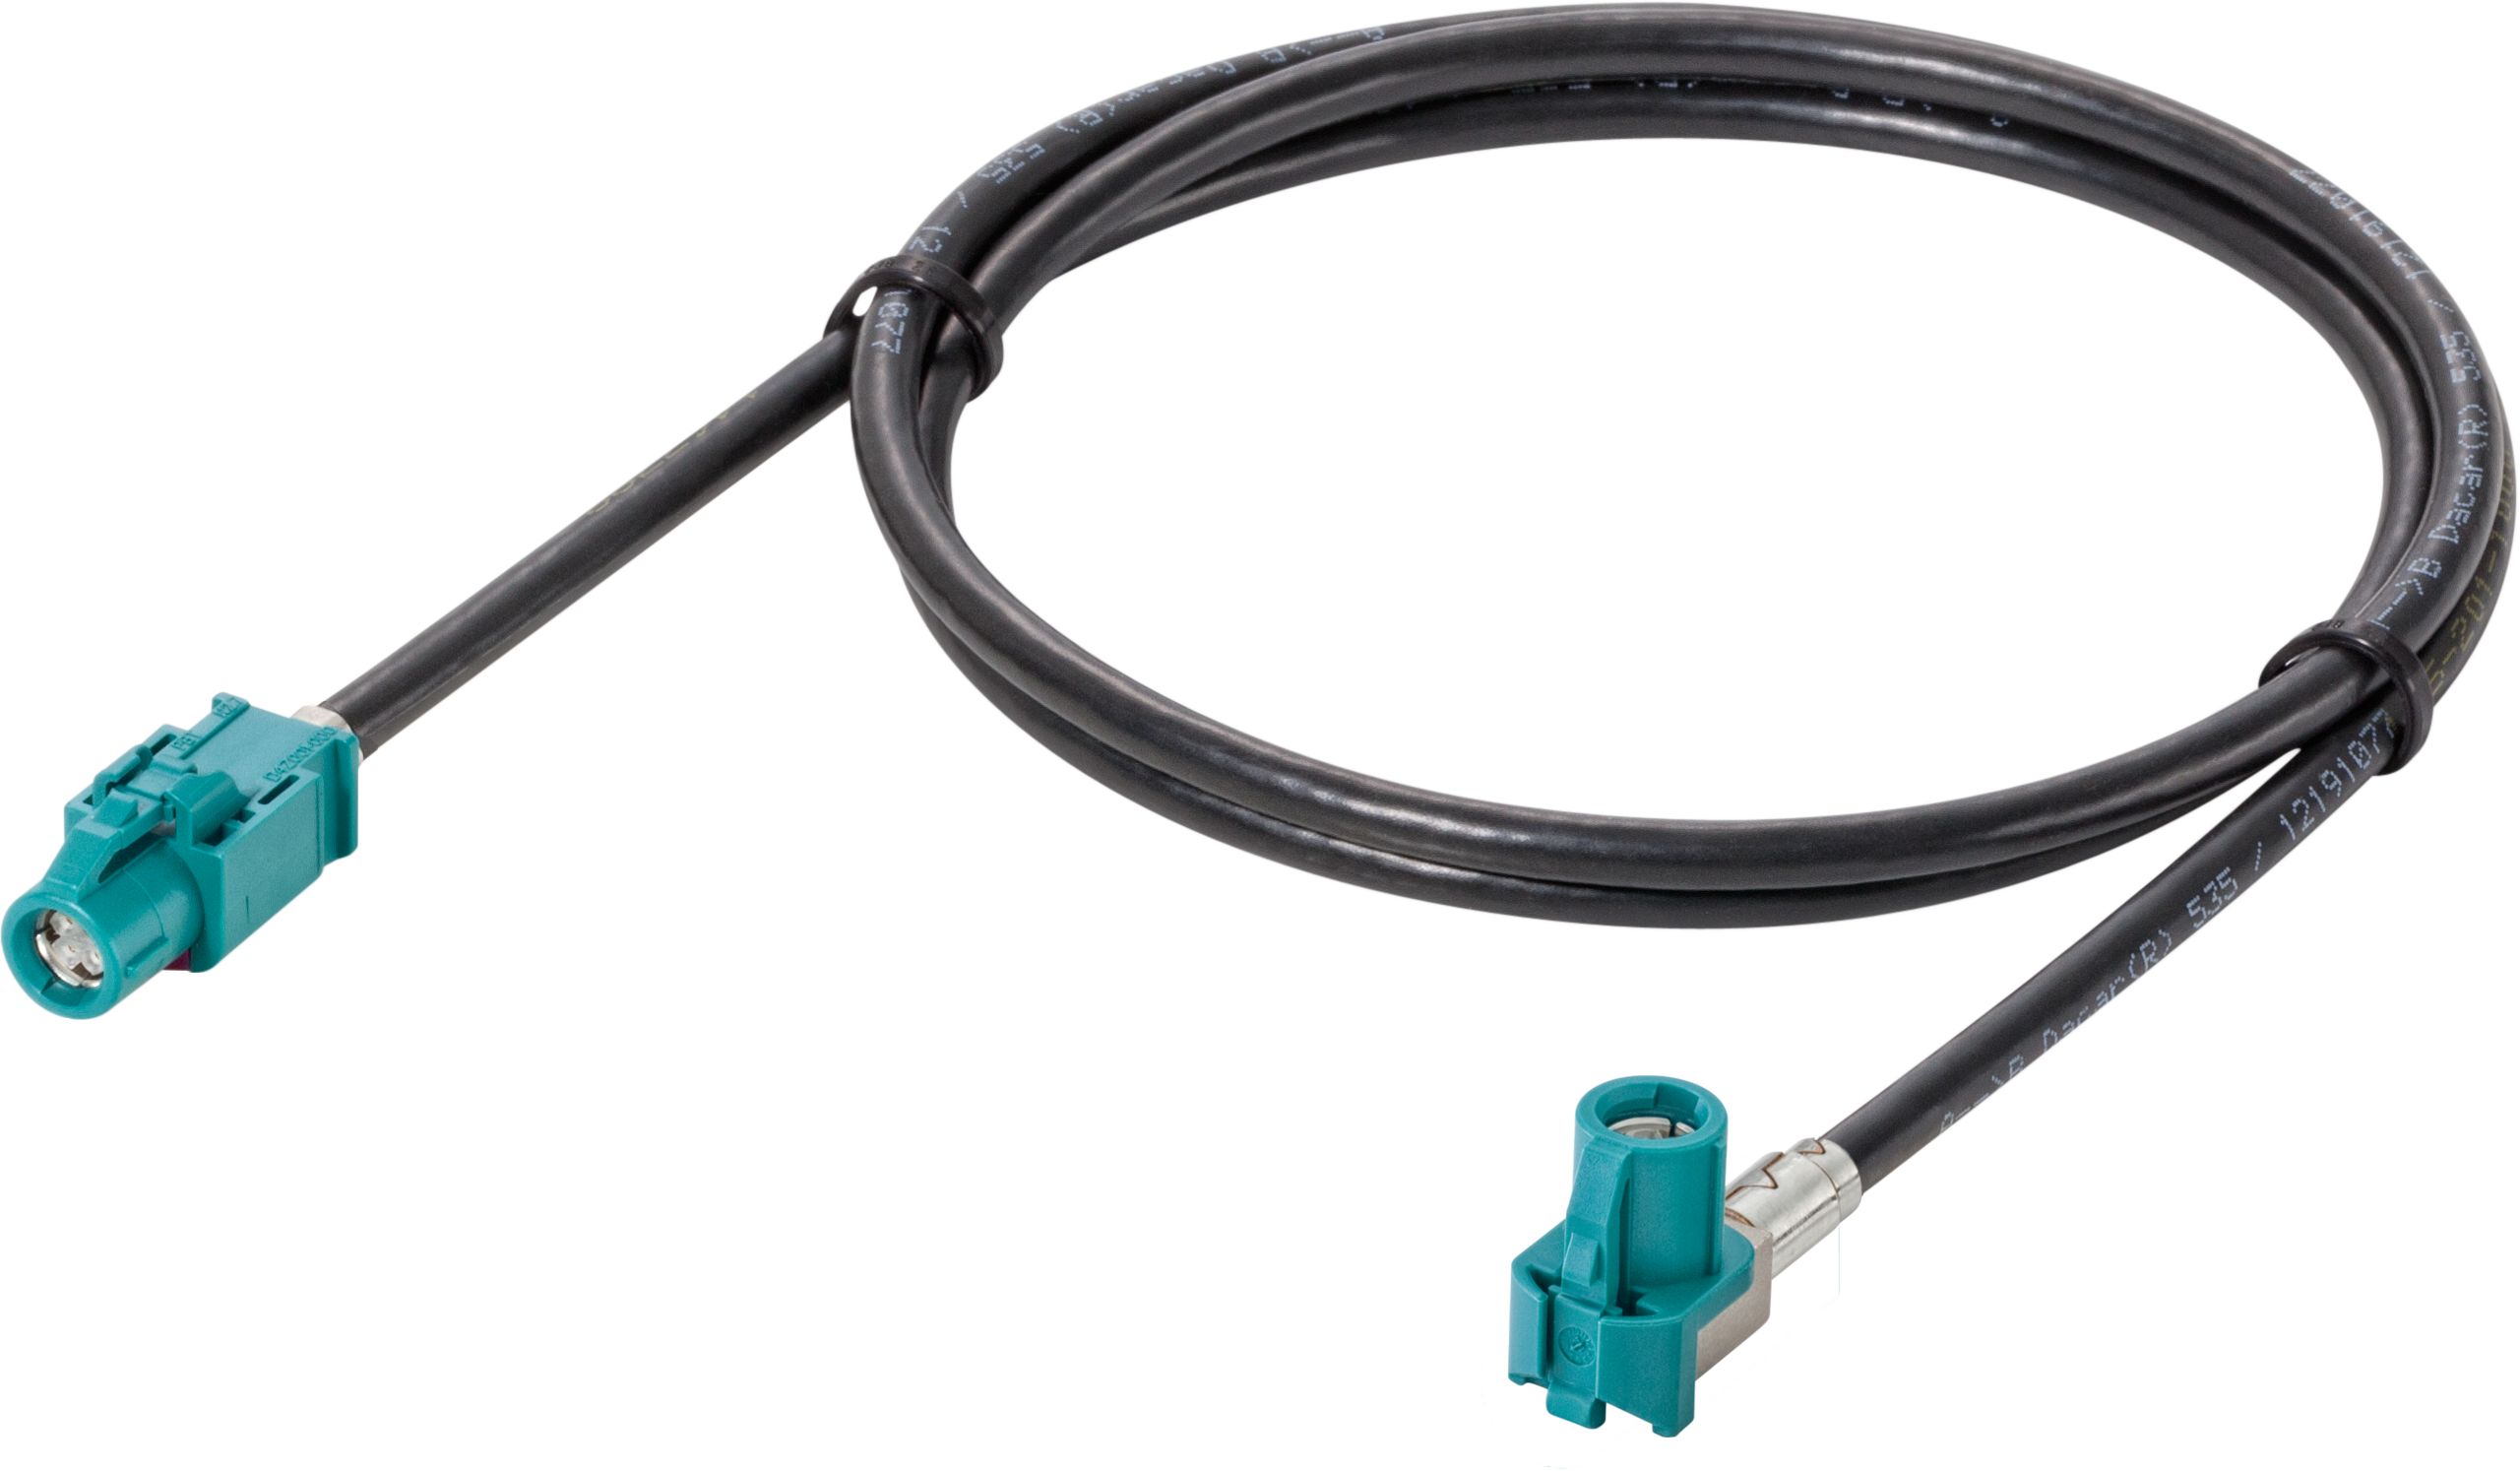 LAF-201-1000-Z-Z cable assembly | Cable Assemblies | Radio Frequency |  Rosenberger Product Catalog